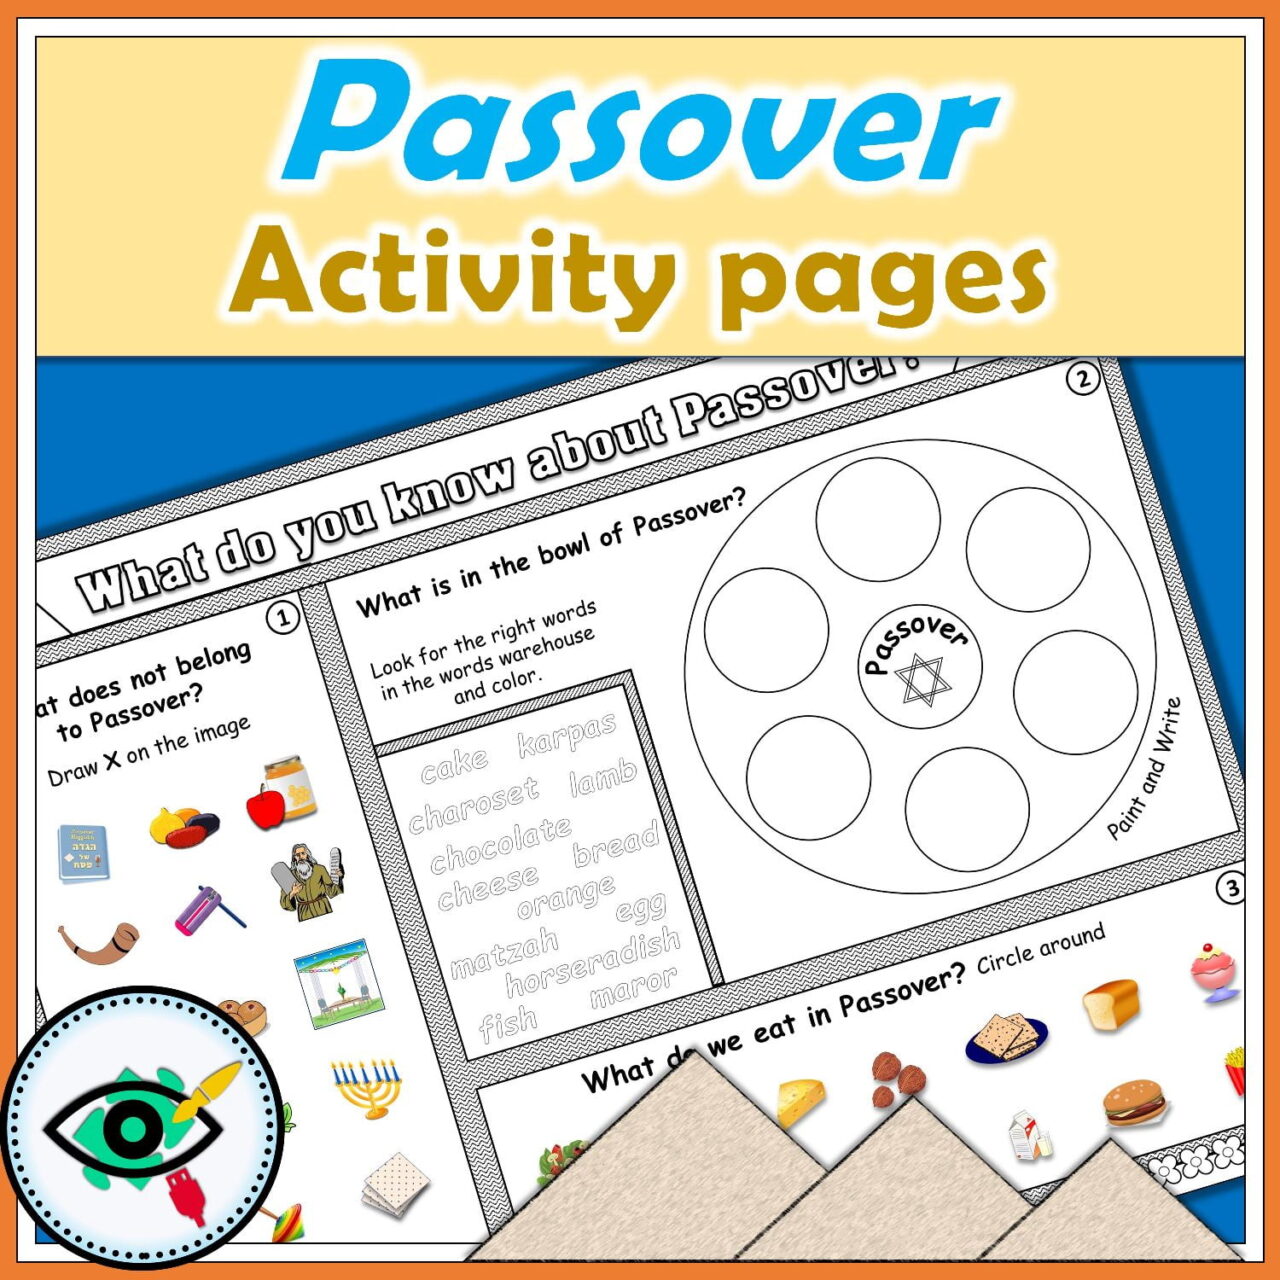 Passover Activity Pages - What Do You Know About Passover | Planerium